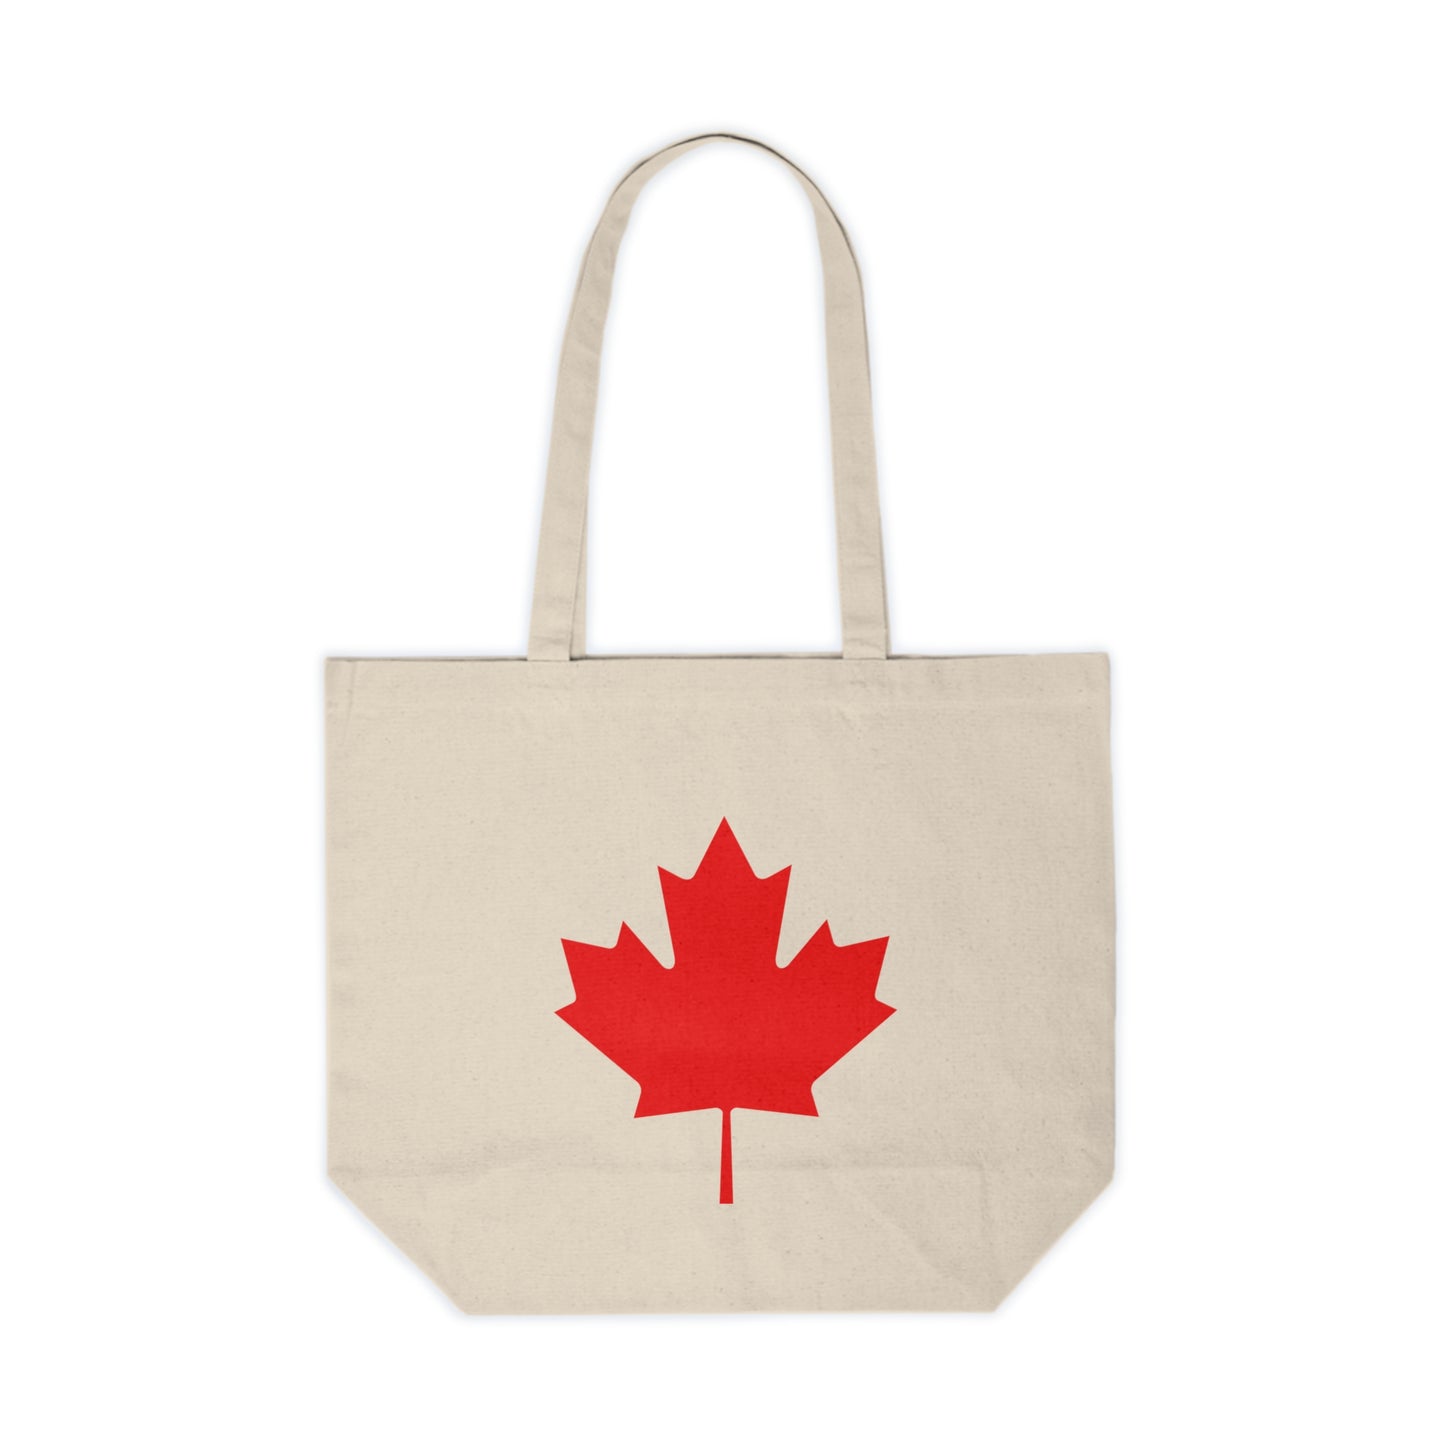 Canadian Maple Leaf Shopping Tote